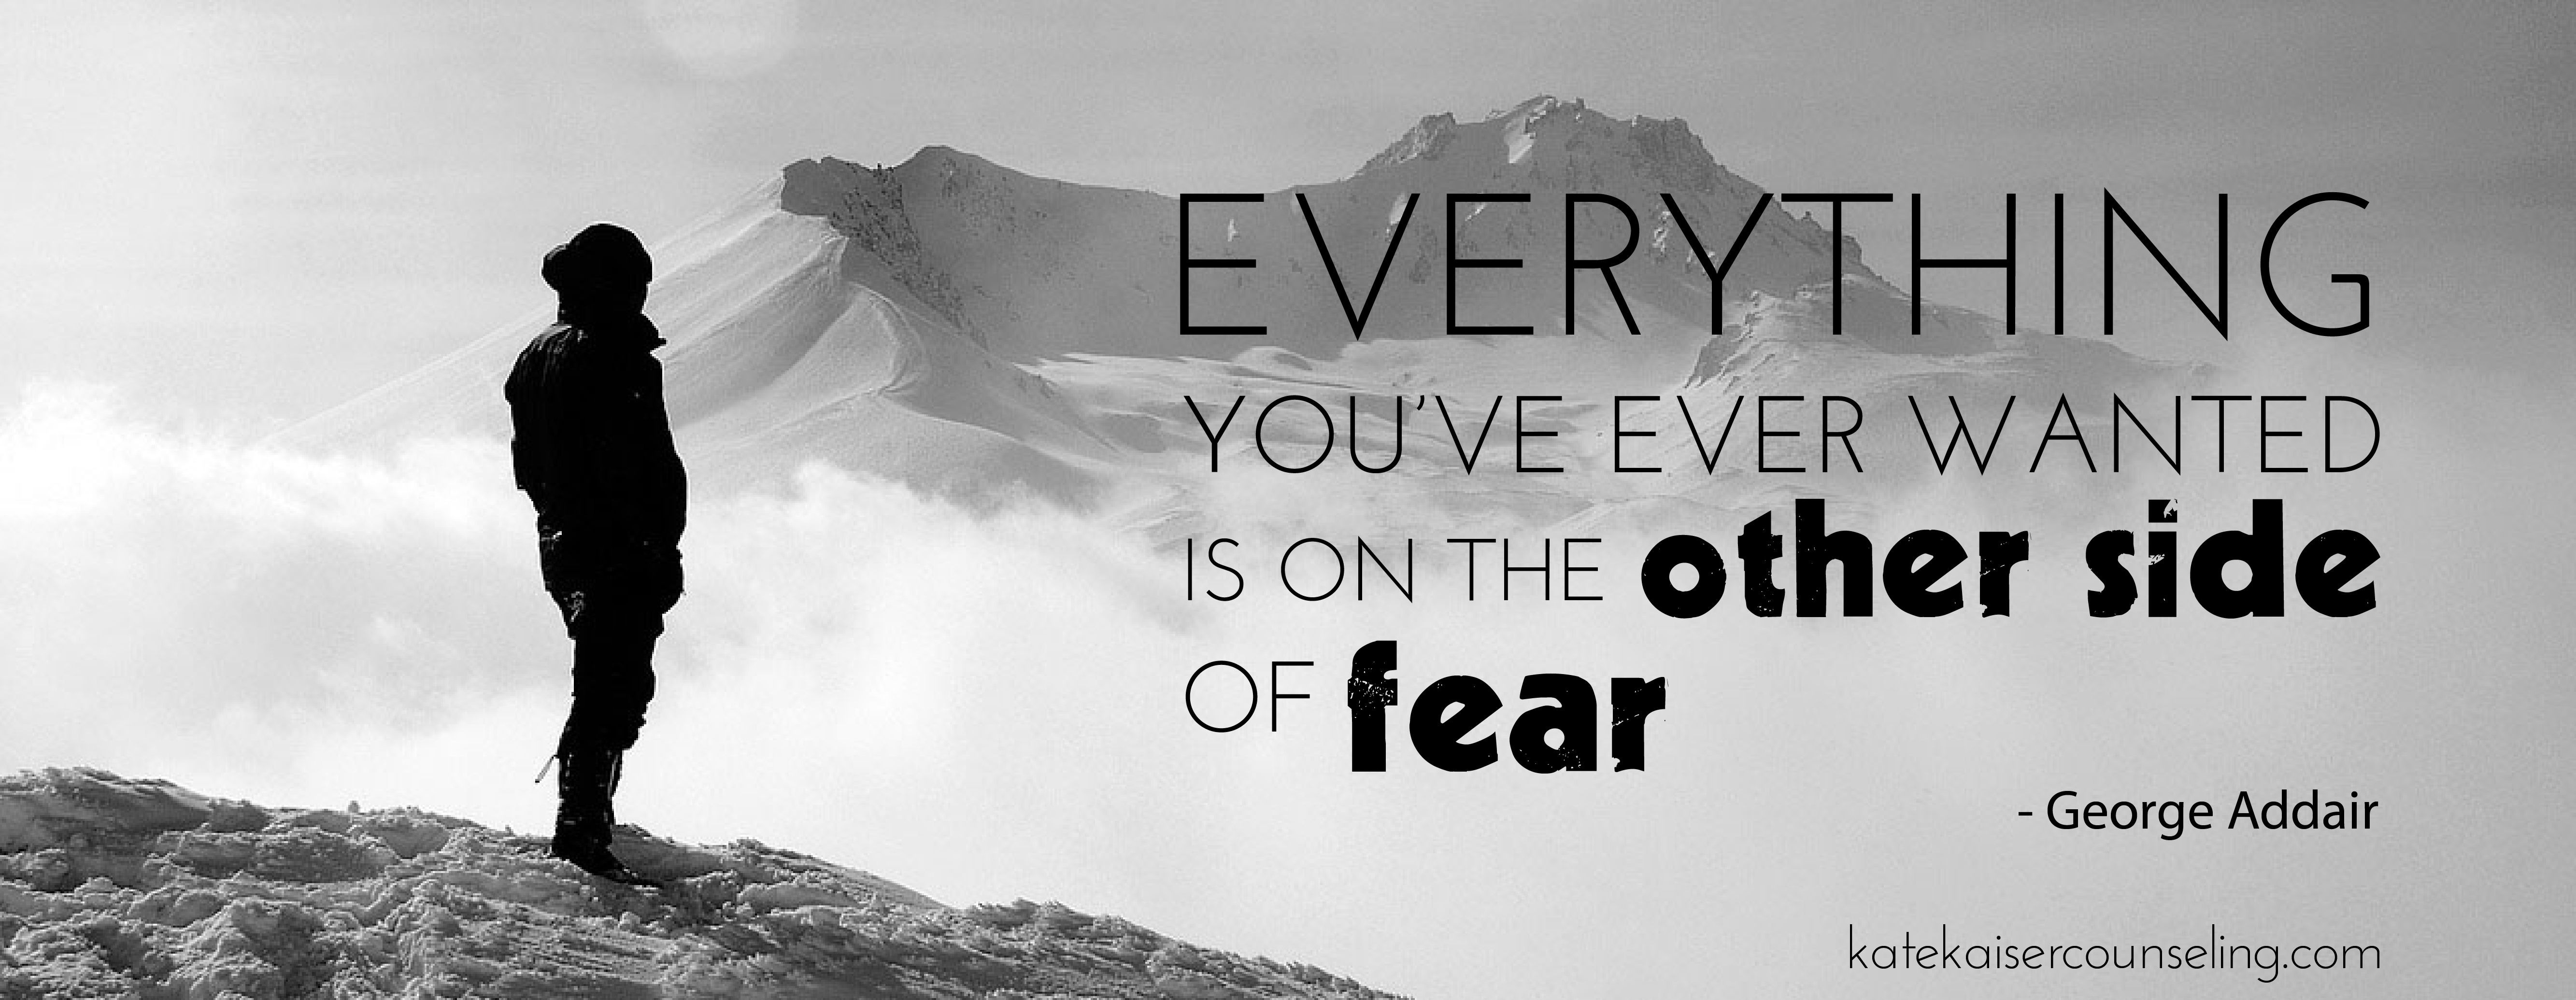 Monday Morning Starts With A Lot Of Fear